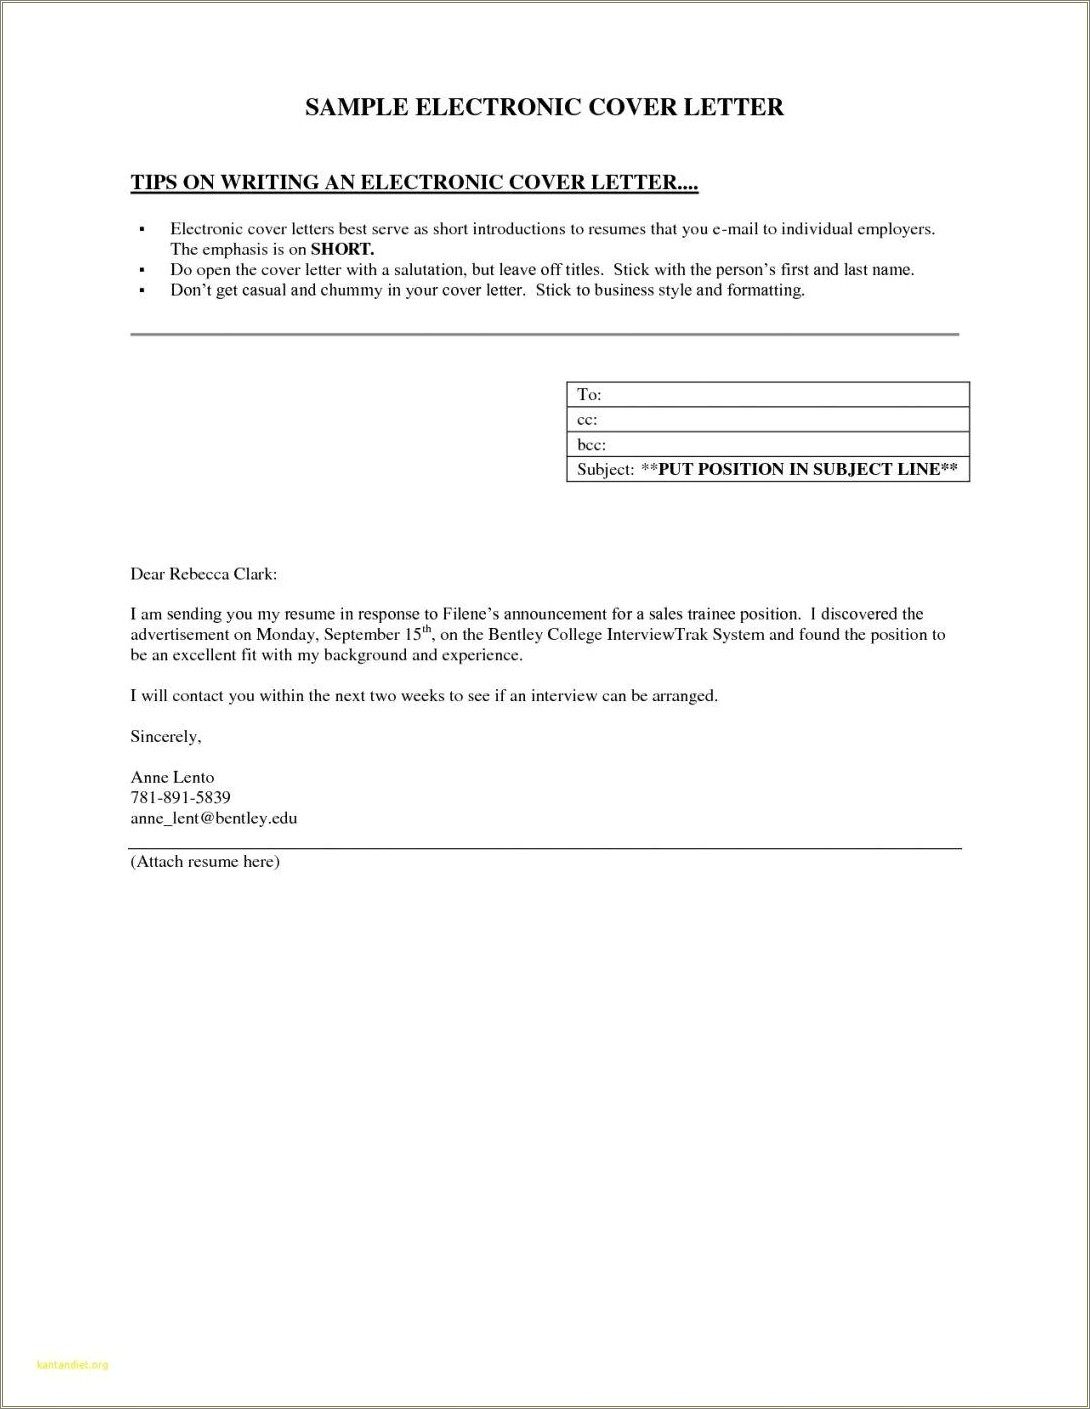 Best Way To Email Cover Letter And Resume